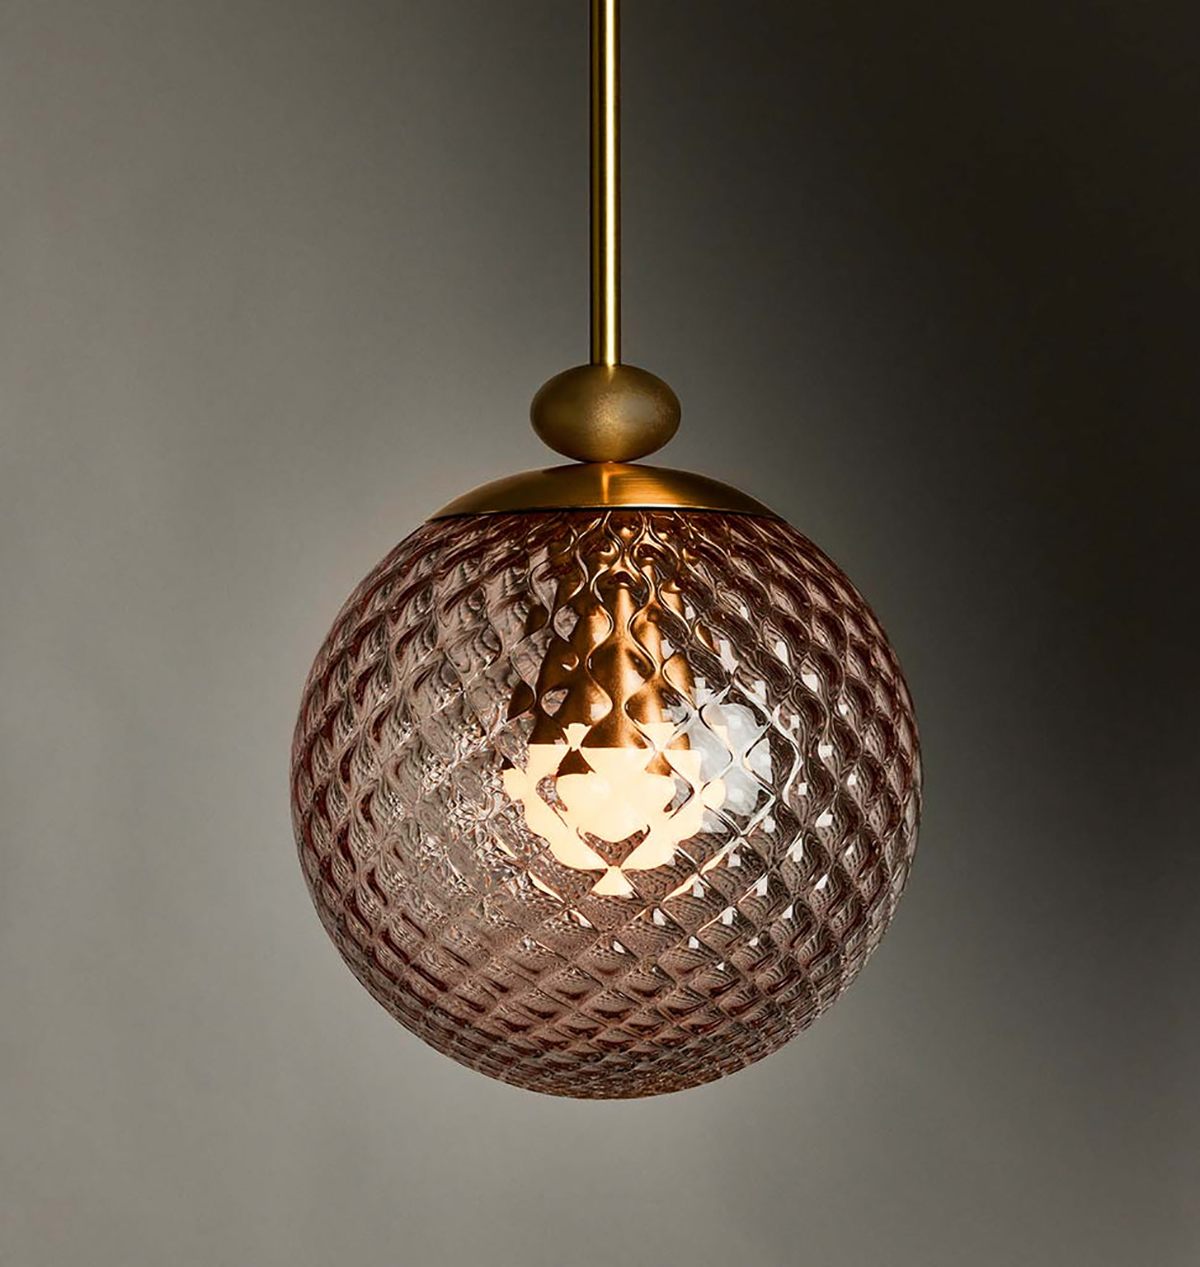 THE ROLL AND HILL PENDANT 03 GLOBE par Roll & Hill